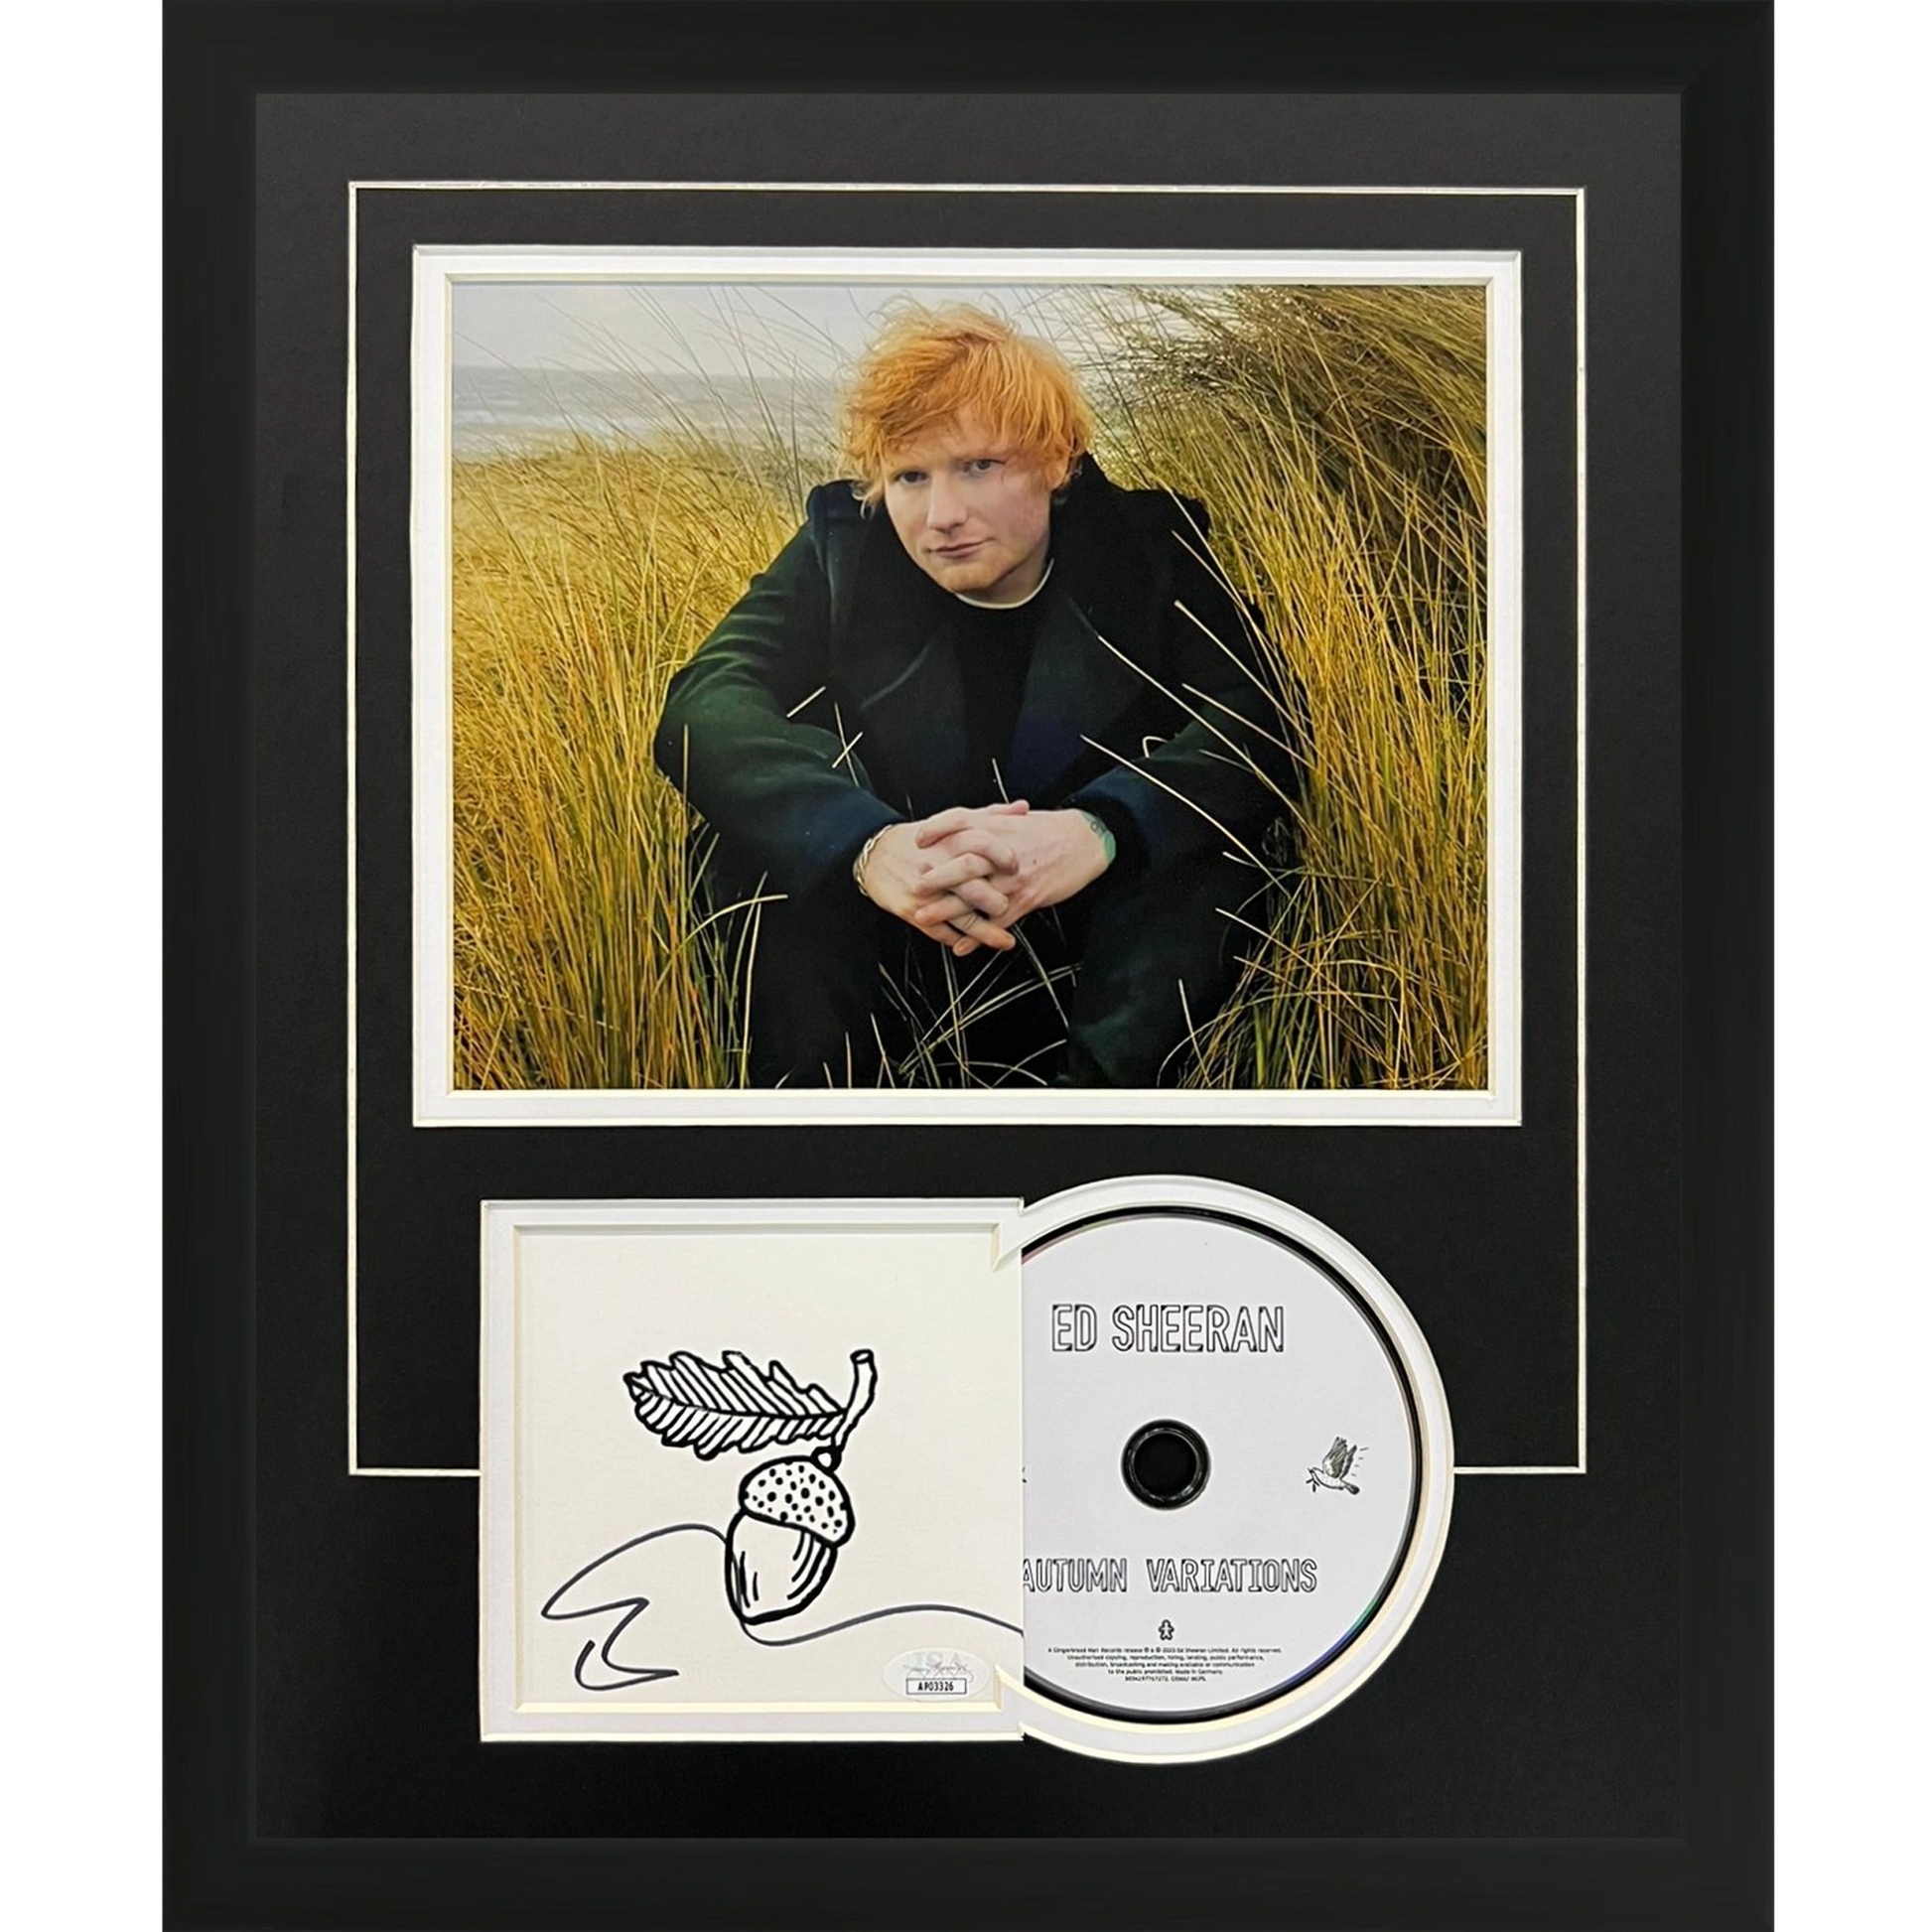 Ed Sheeran Autographed Autumn Variations Deluxe Framed CD and Cover - JSA